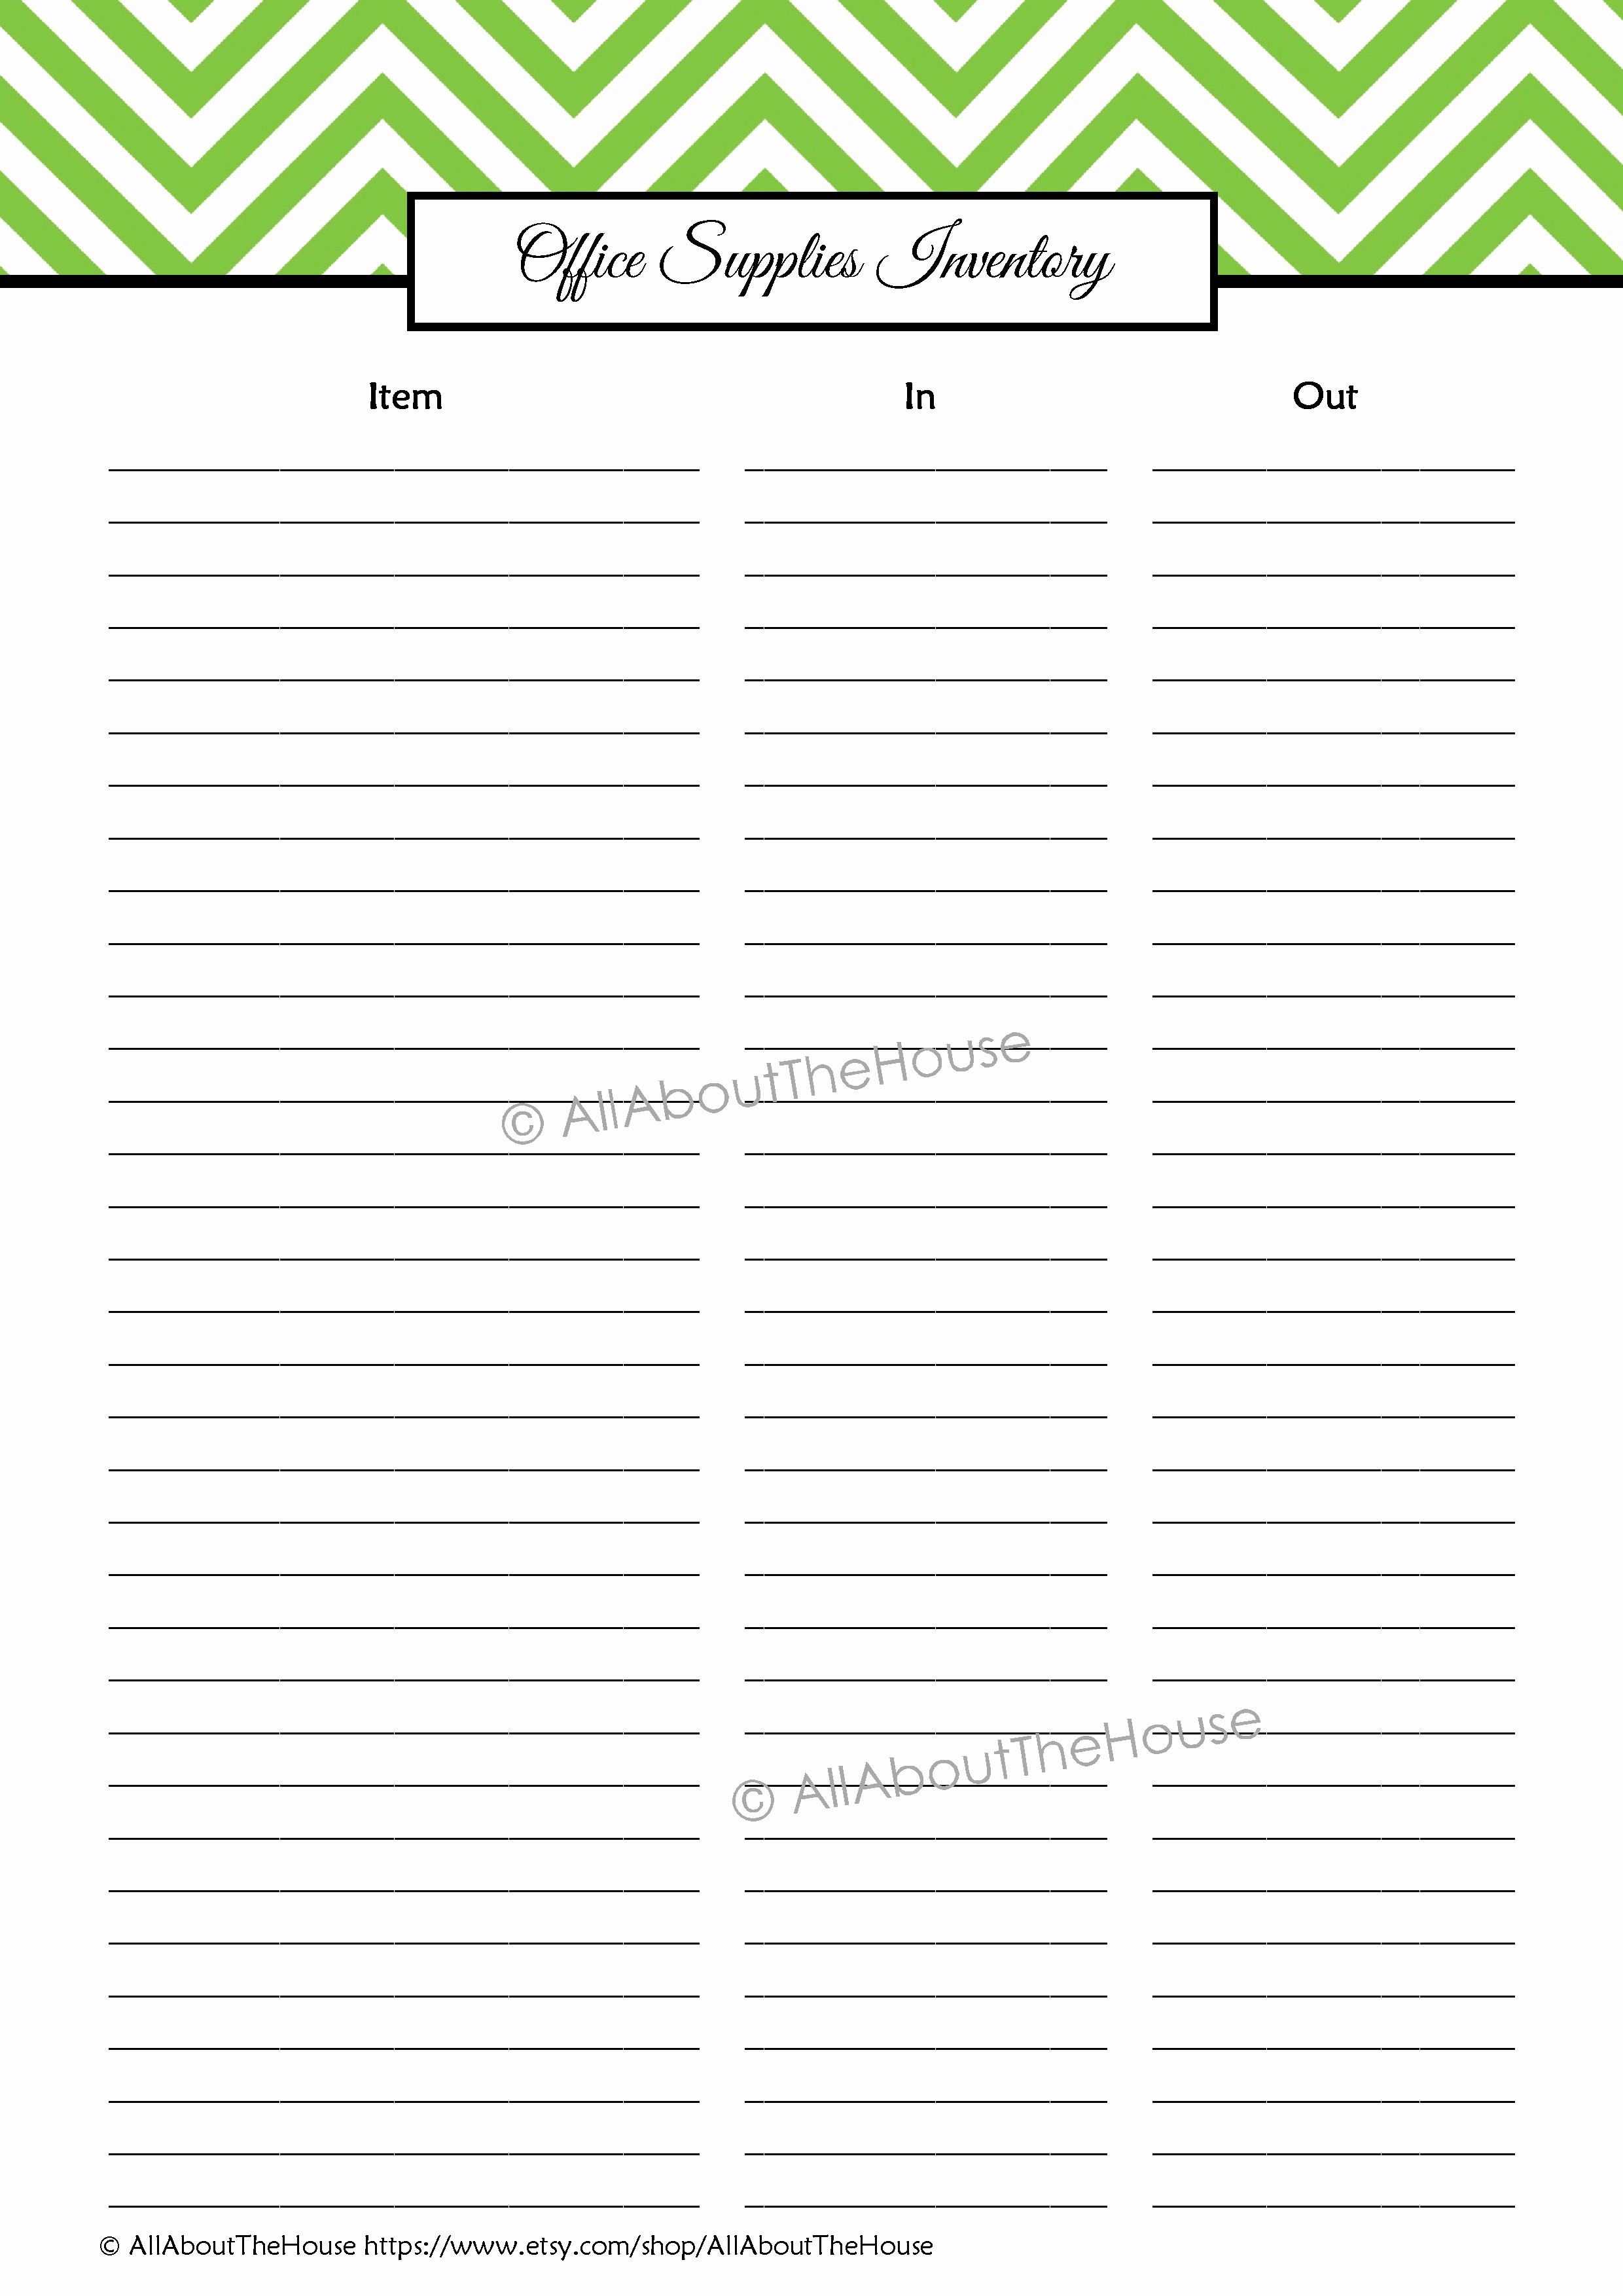 Office Supply order List Template Awesome Printable Fice Supply List Portablegasgrillweber